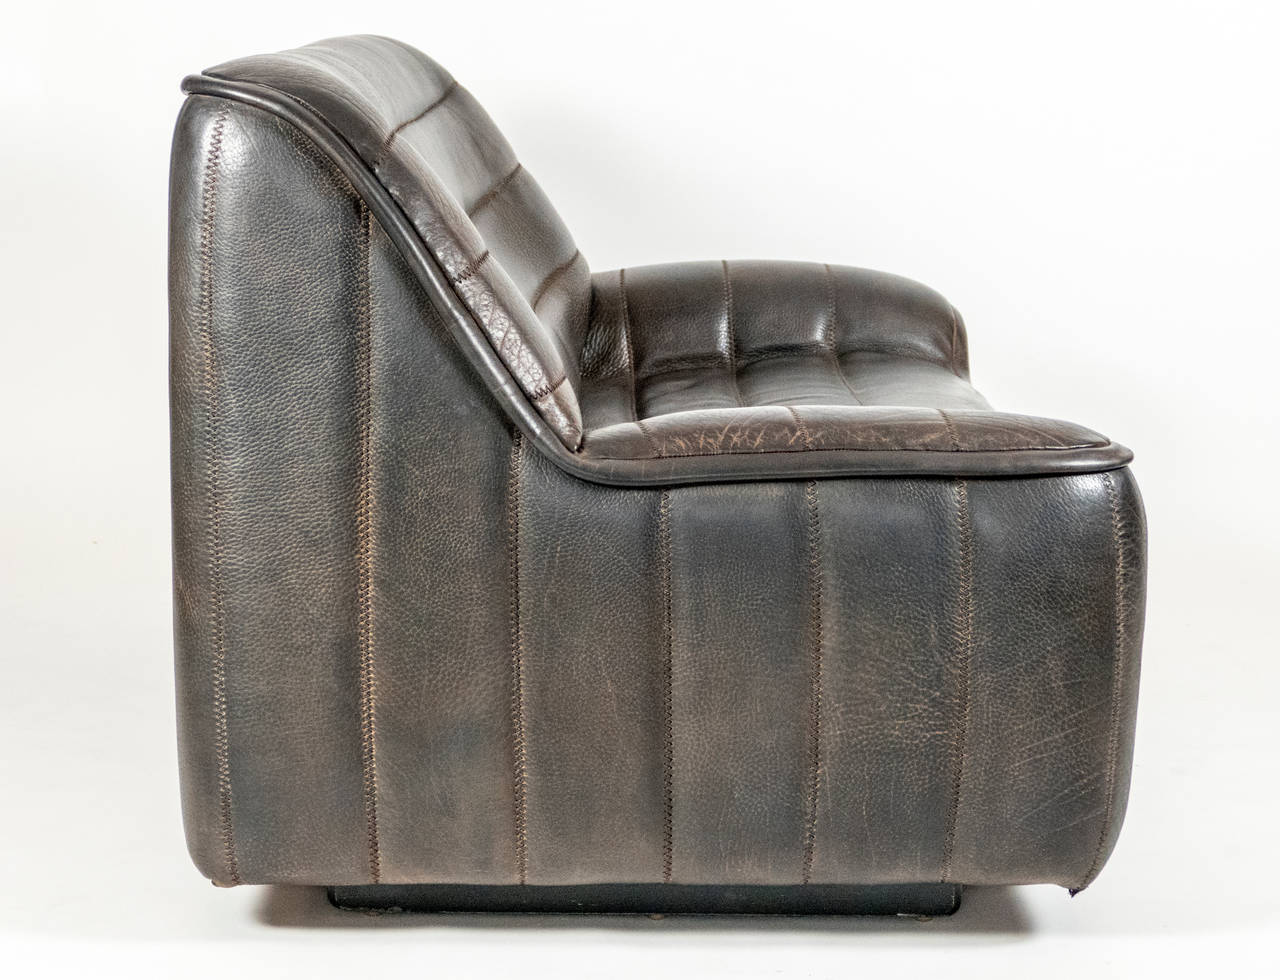 Great Patina on this quilted leather love seat.  Very comfortable and in great condition.